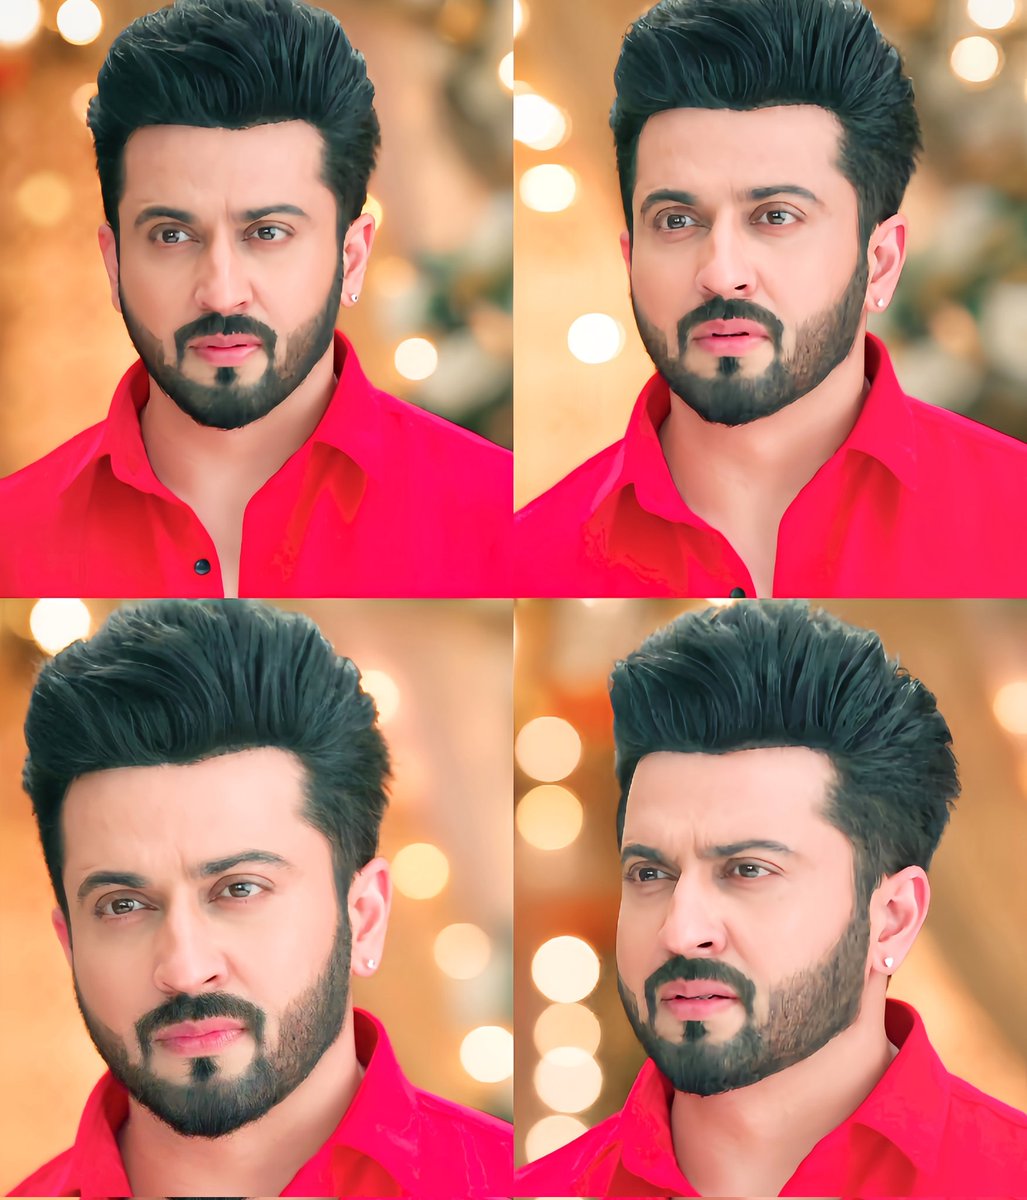 Our #DheerajDhoopar's ability to switch expressions within seconds is phenomenal,demonstrating his versatility & depth as an actor🙌
Despite fewer dialogues, #SubhaanSiddiqui's impact on the storyline remains profound, thanks to our hero's compelling performance❤
#RabbSeHaiDua